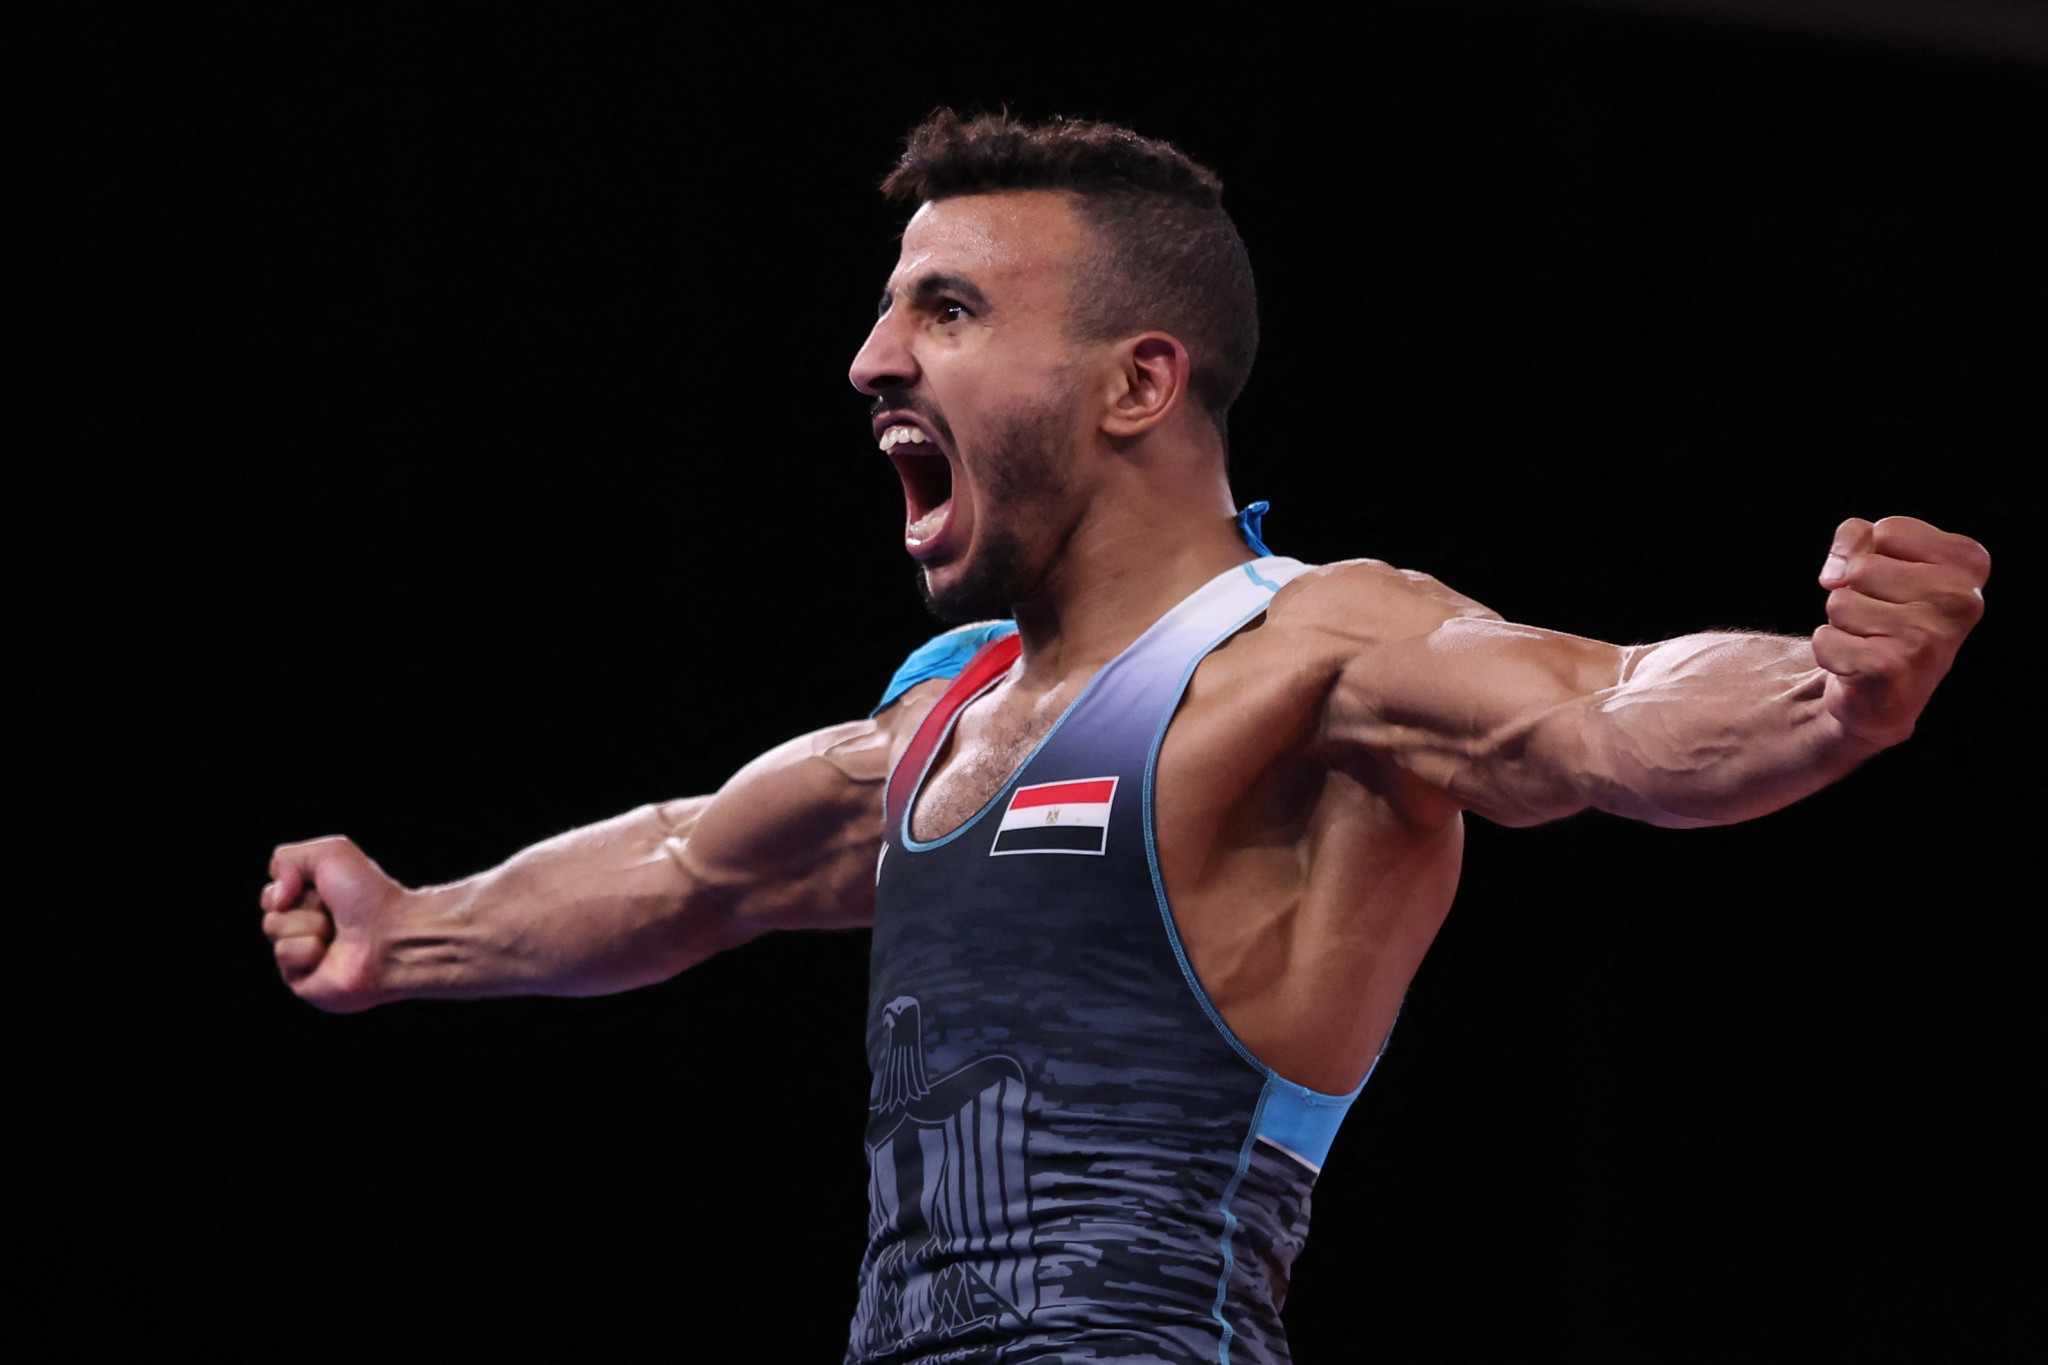 Tokyo 2020 bronze medallist Mohamed Elsayed (Egypt) has one last chance to qualify for Paris 2024. GETTY IMAGES